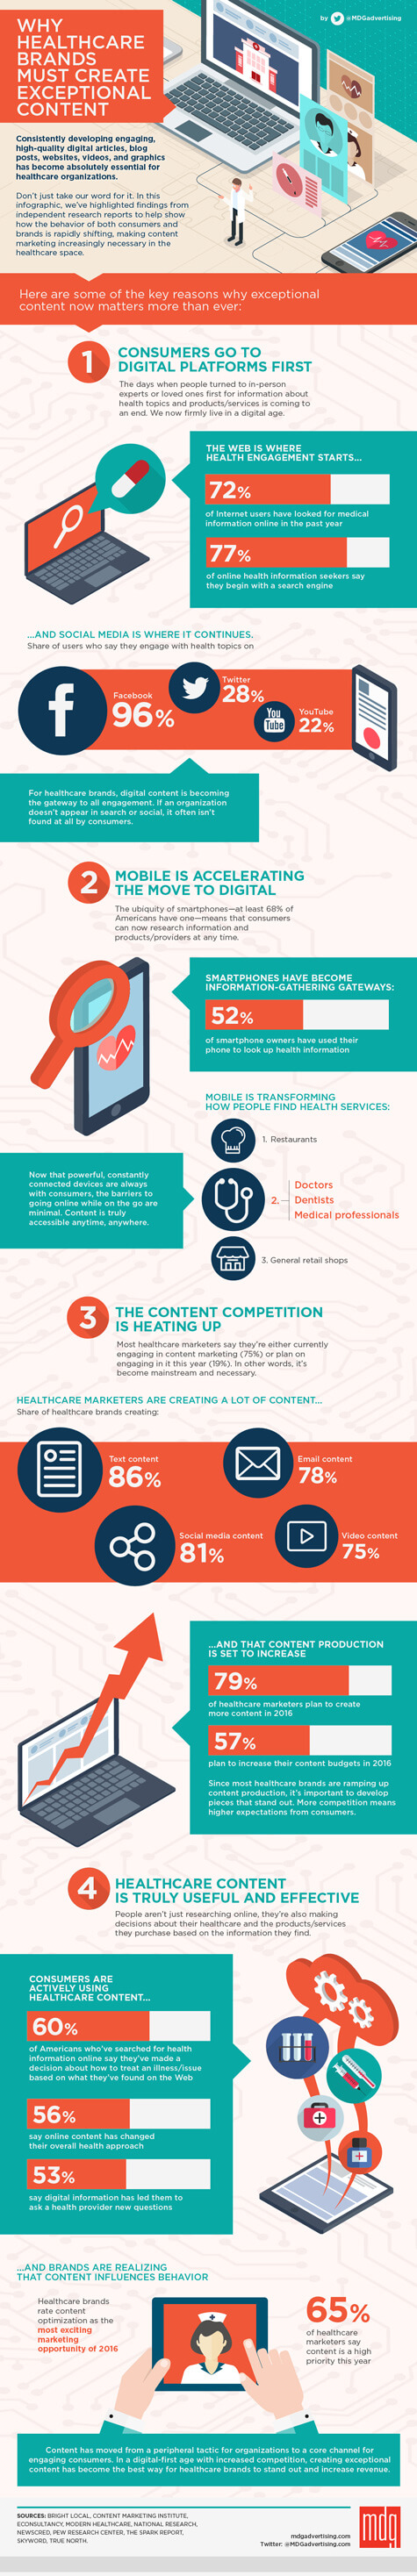 1823 475x2936 Why Healthcare Brands Must Create Exceptional Content